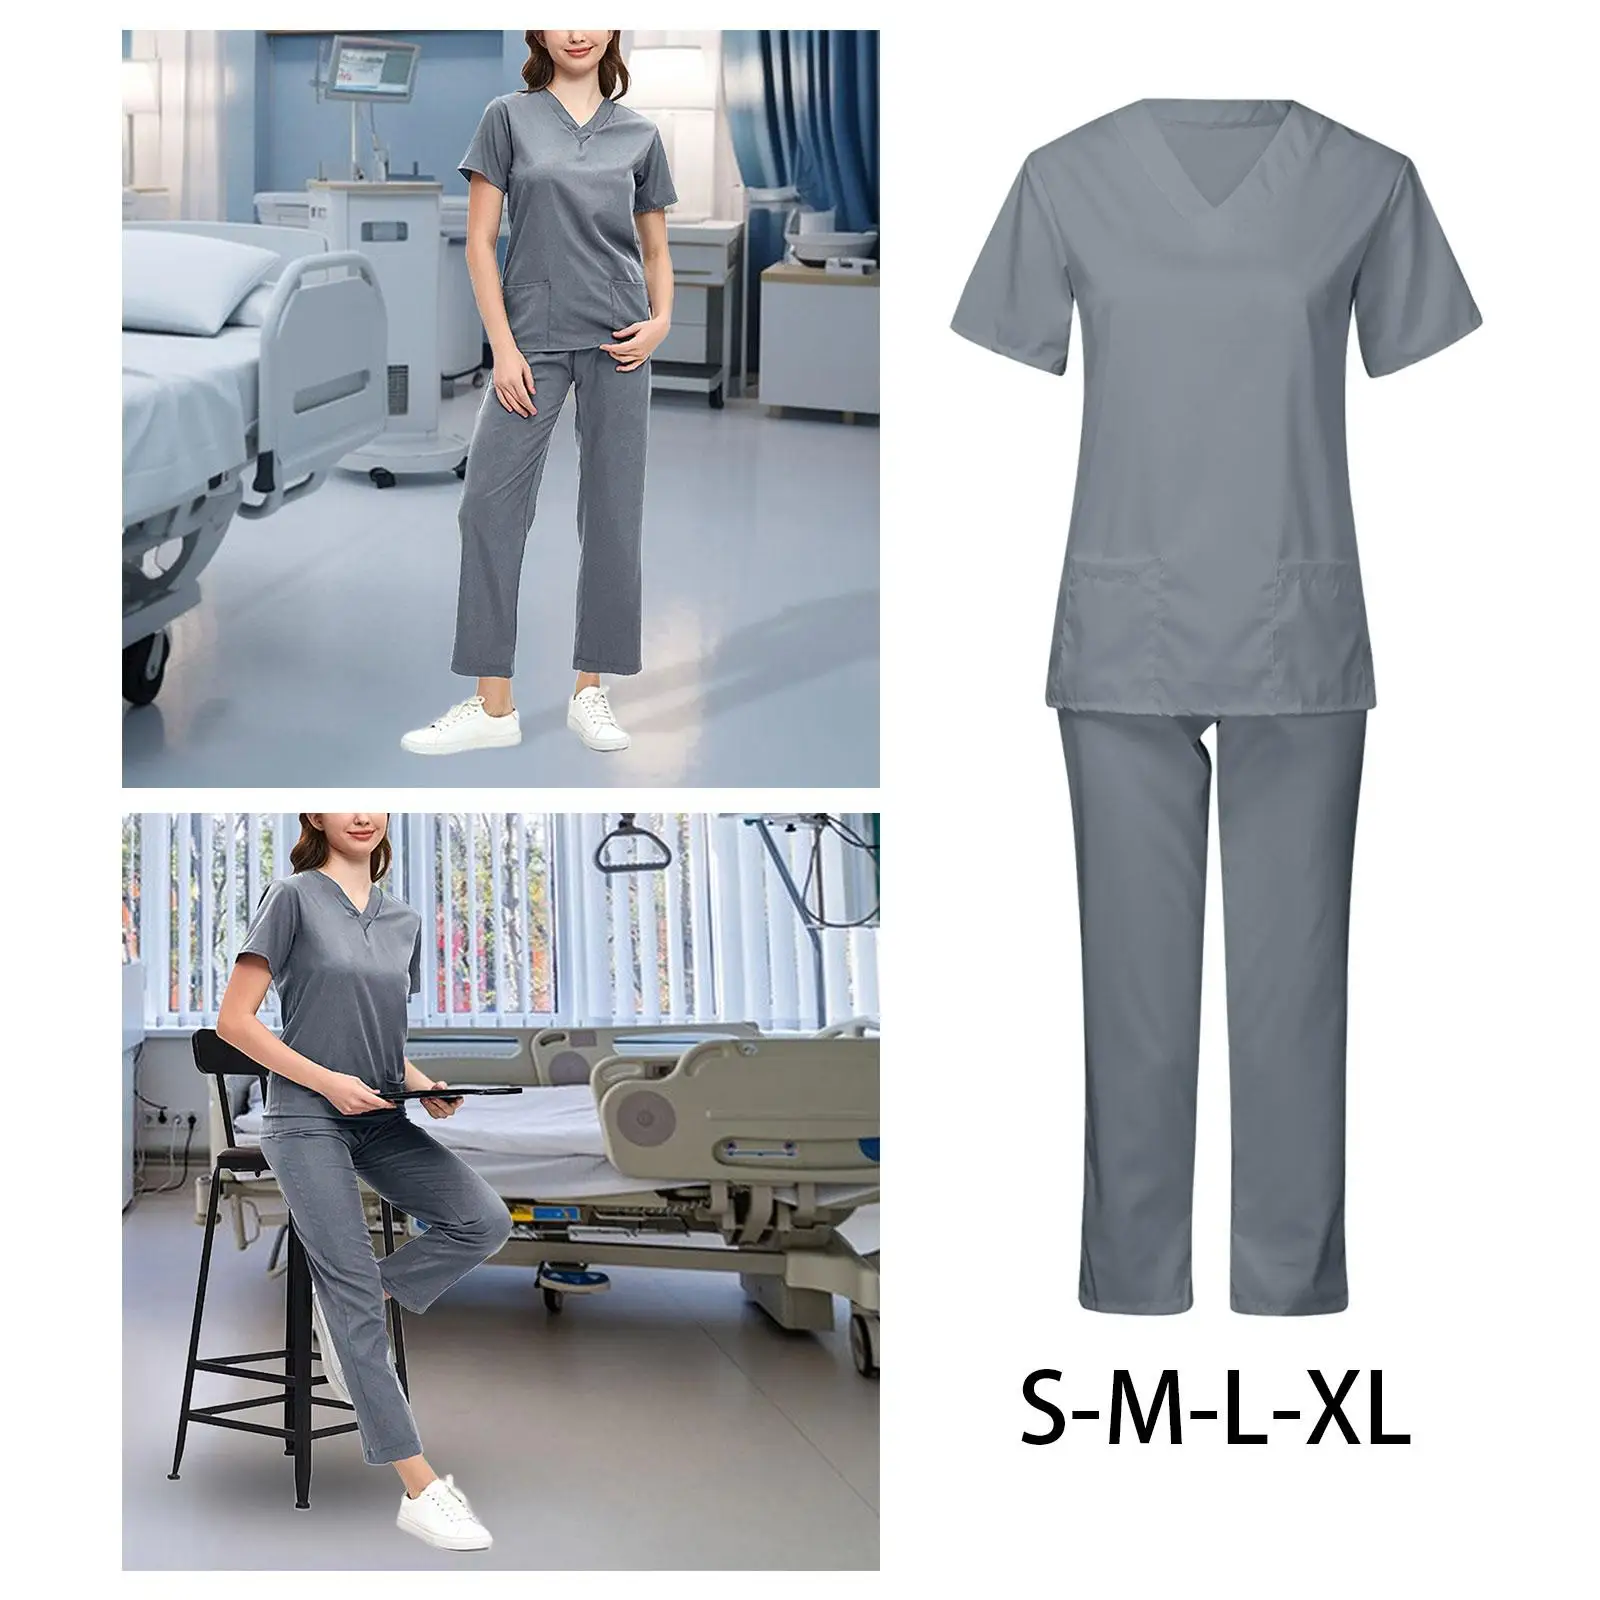 Women Scrubs Set Scrubs Top and Pants Work suits Clothes Nursing Uniforms Scrubs for Cosmetology Operating Room Pet Grooming